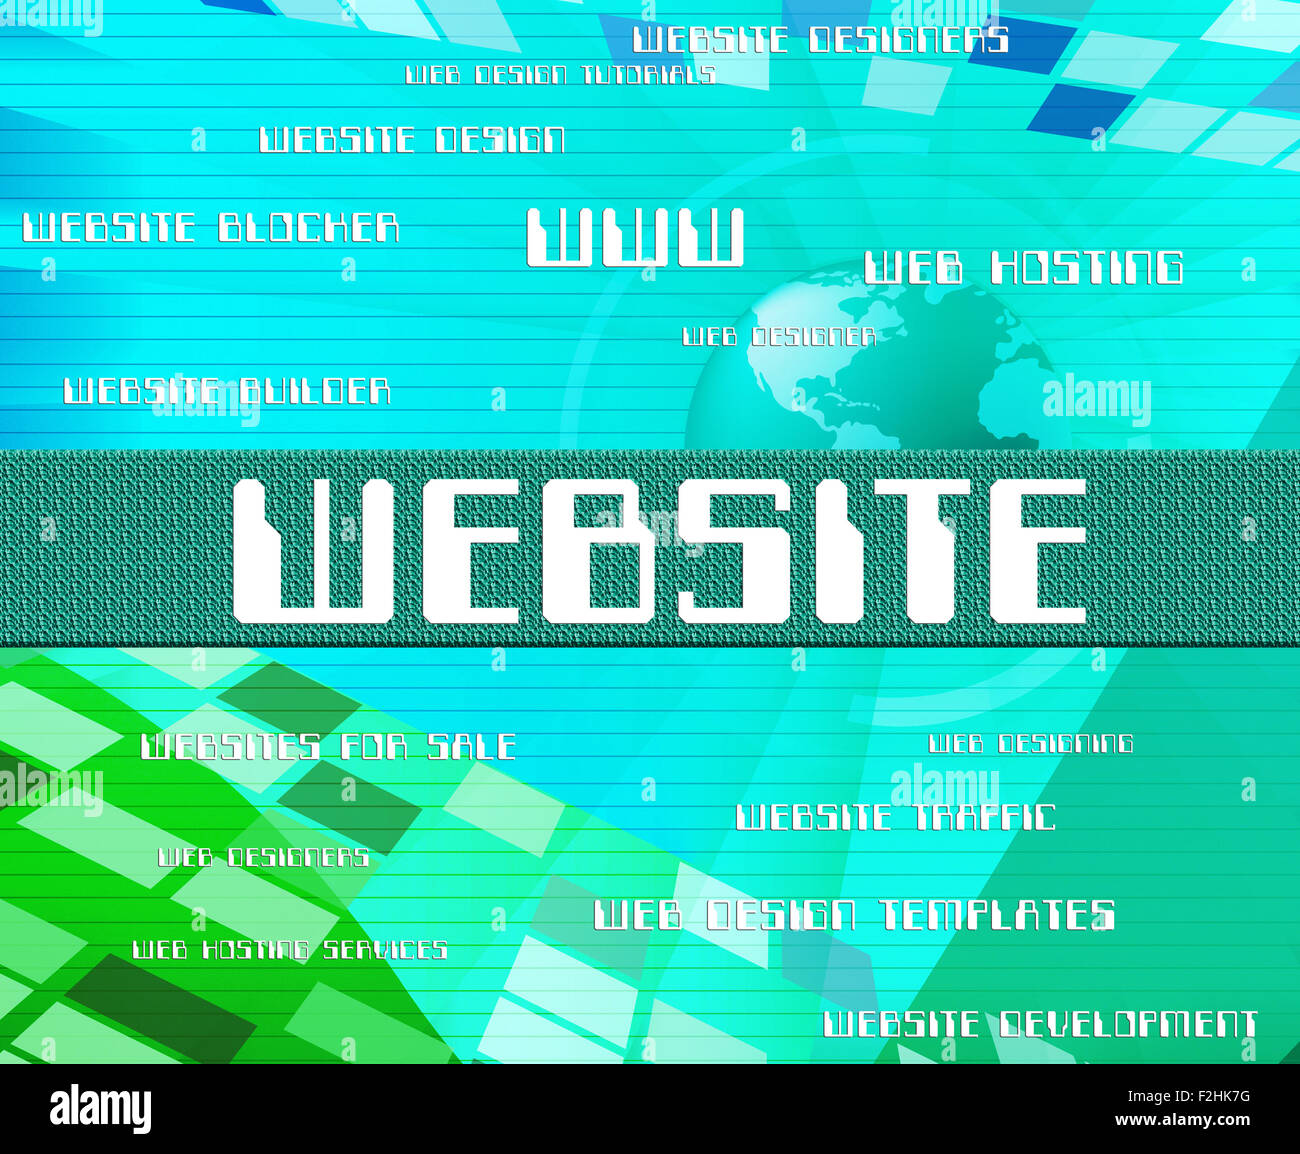 Website Word Showing Words Technology And Websites Stock Photo